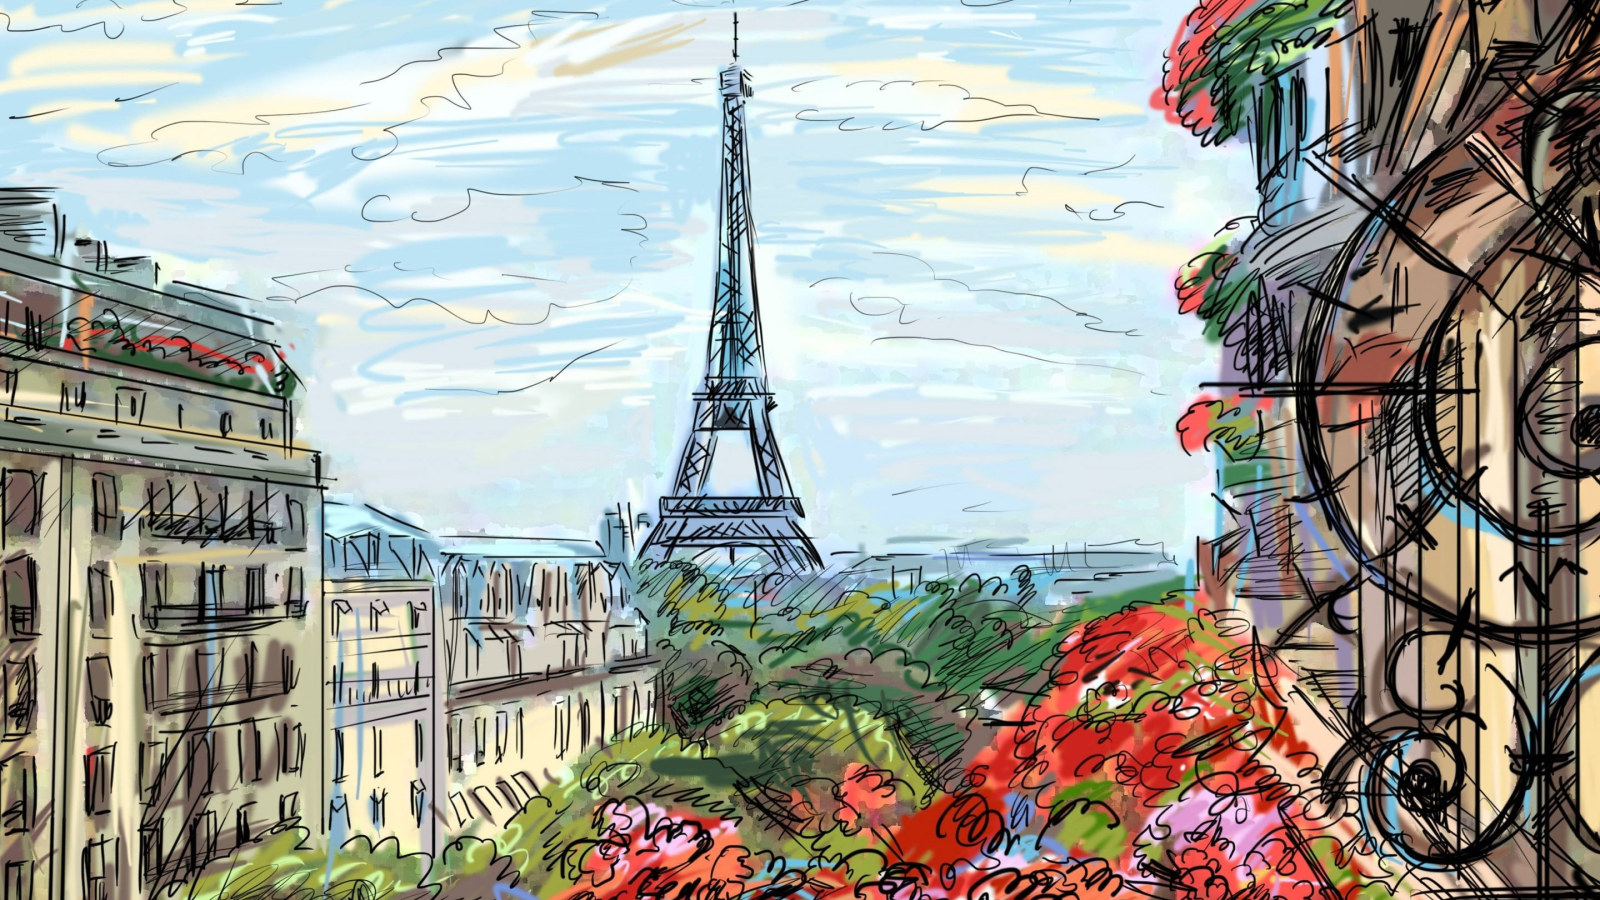 World Famous Historical site Cultural Heritage Architectural Scenery Eiffel  Tower Anime Art Poster Body Painting Poster Living Room Bedroom Poster  16x24inch40x60cm  Amazonca Home